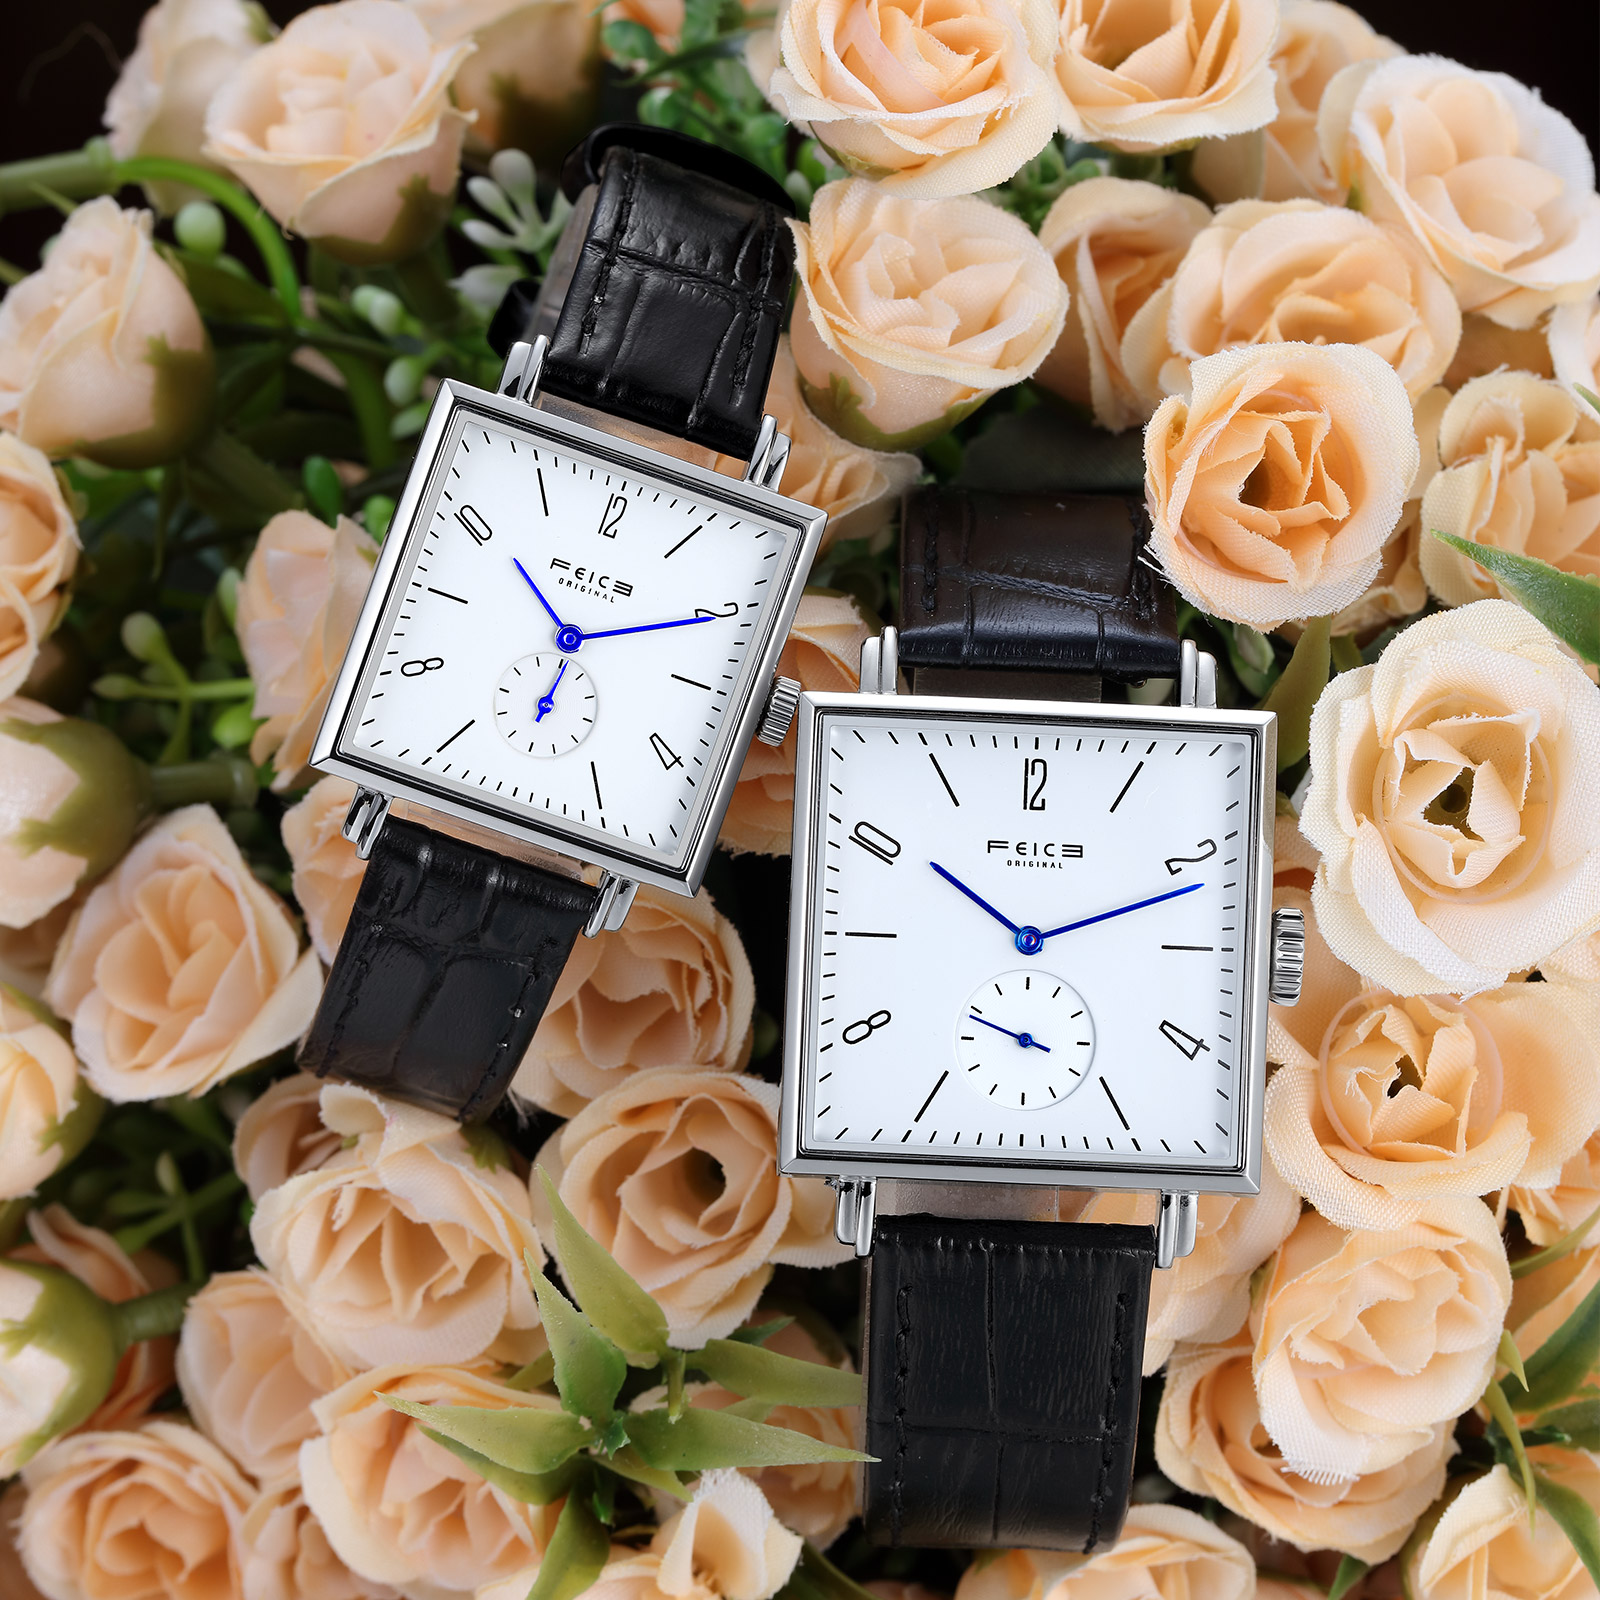 FQ301 Couple Pair Watch Automatic for Men and Women His and Hers Watches Set Gifts Mechanical Self-Winding Dress Wristwatch with Day Date Calendar